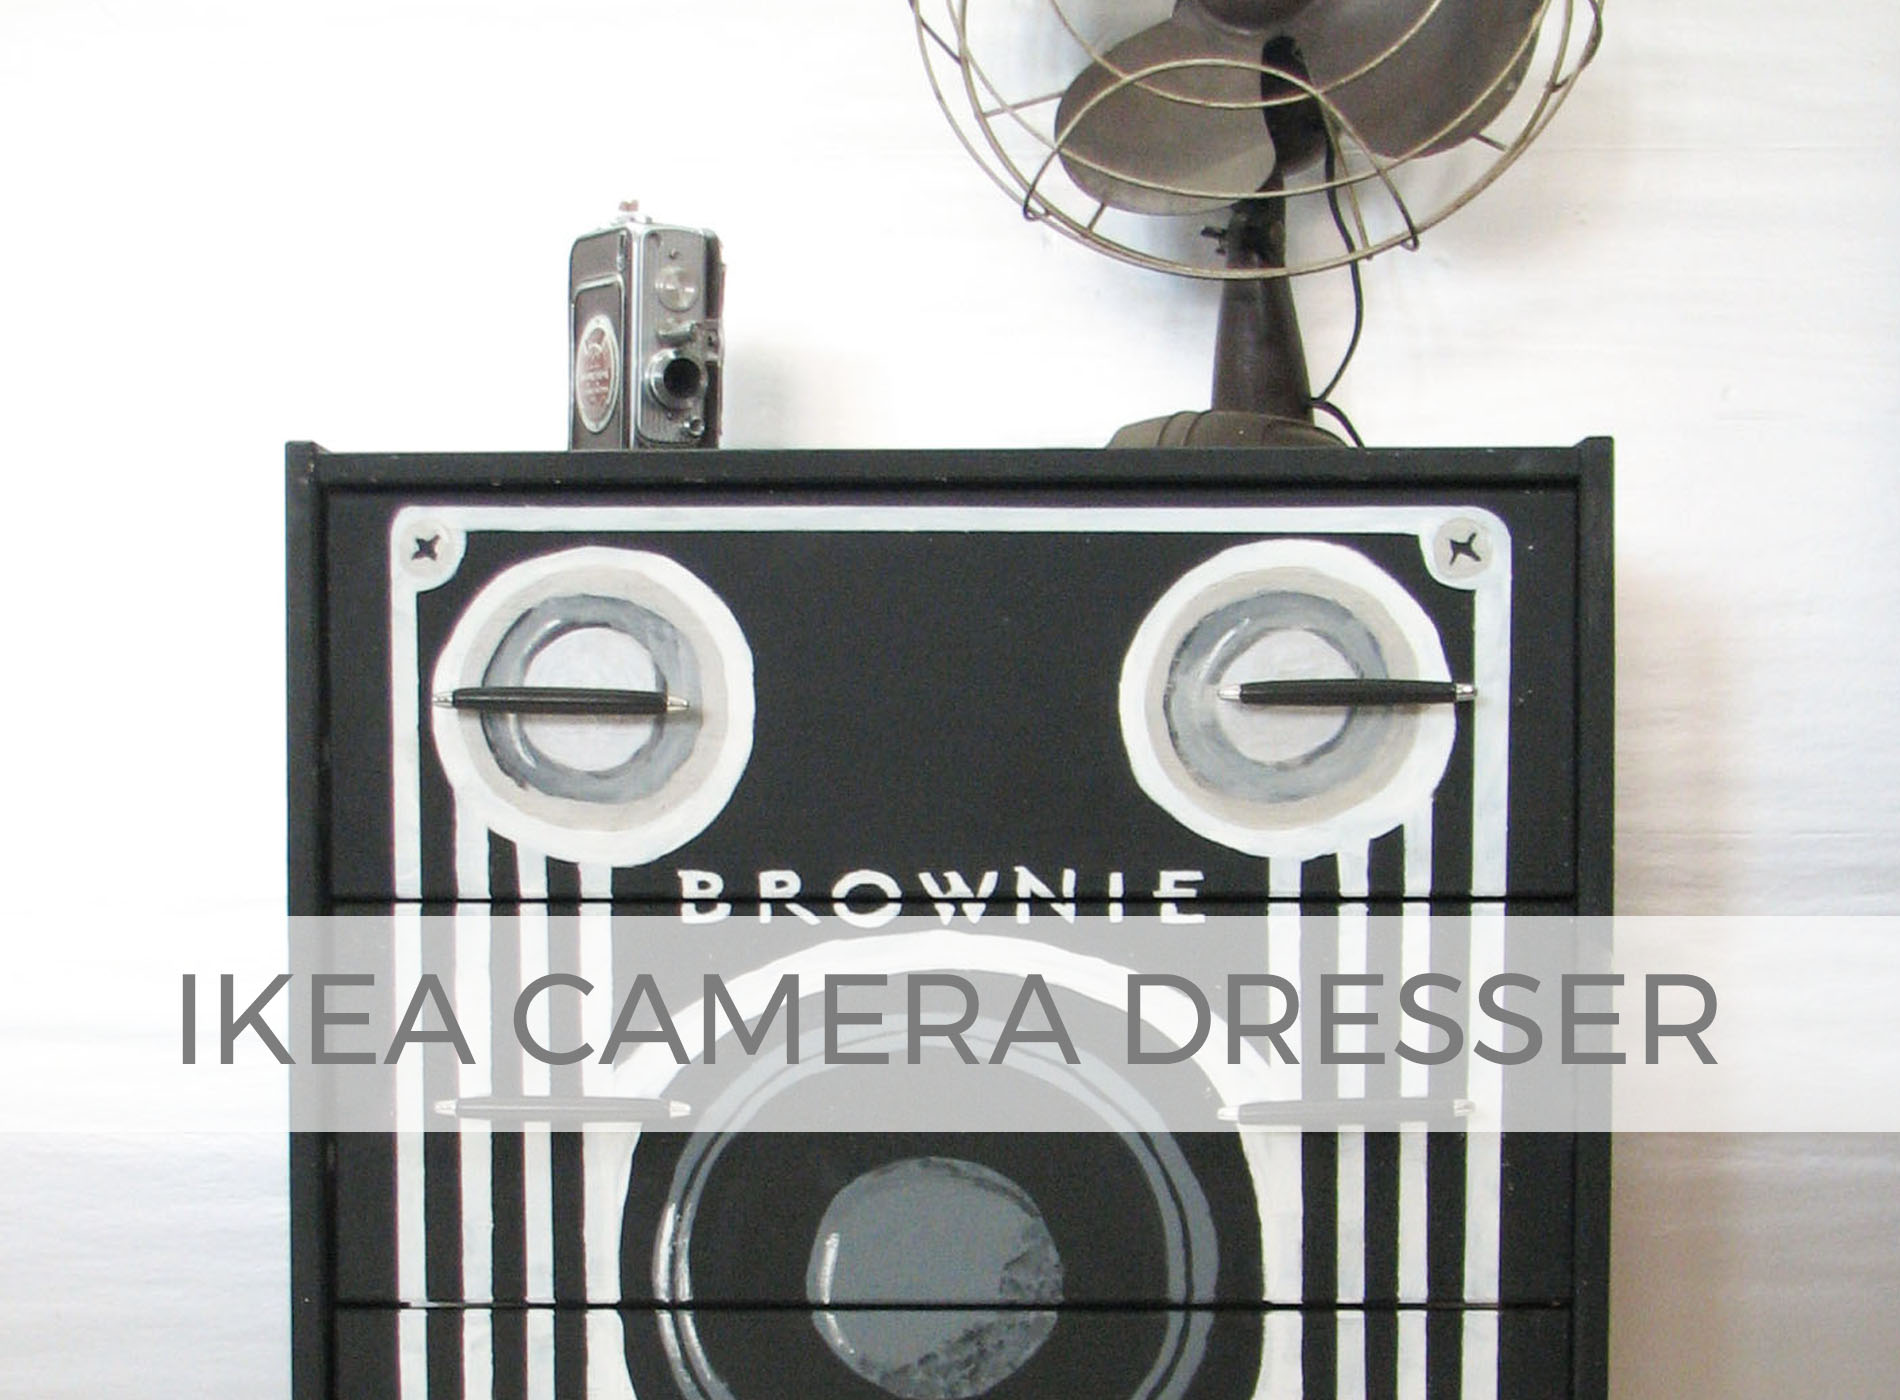 Ikea Furniture Transformed into a Vintage Brownie Camera by Larissa of Prodigal Pieces | prodigalpieces.com